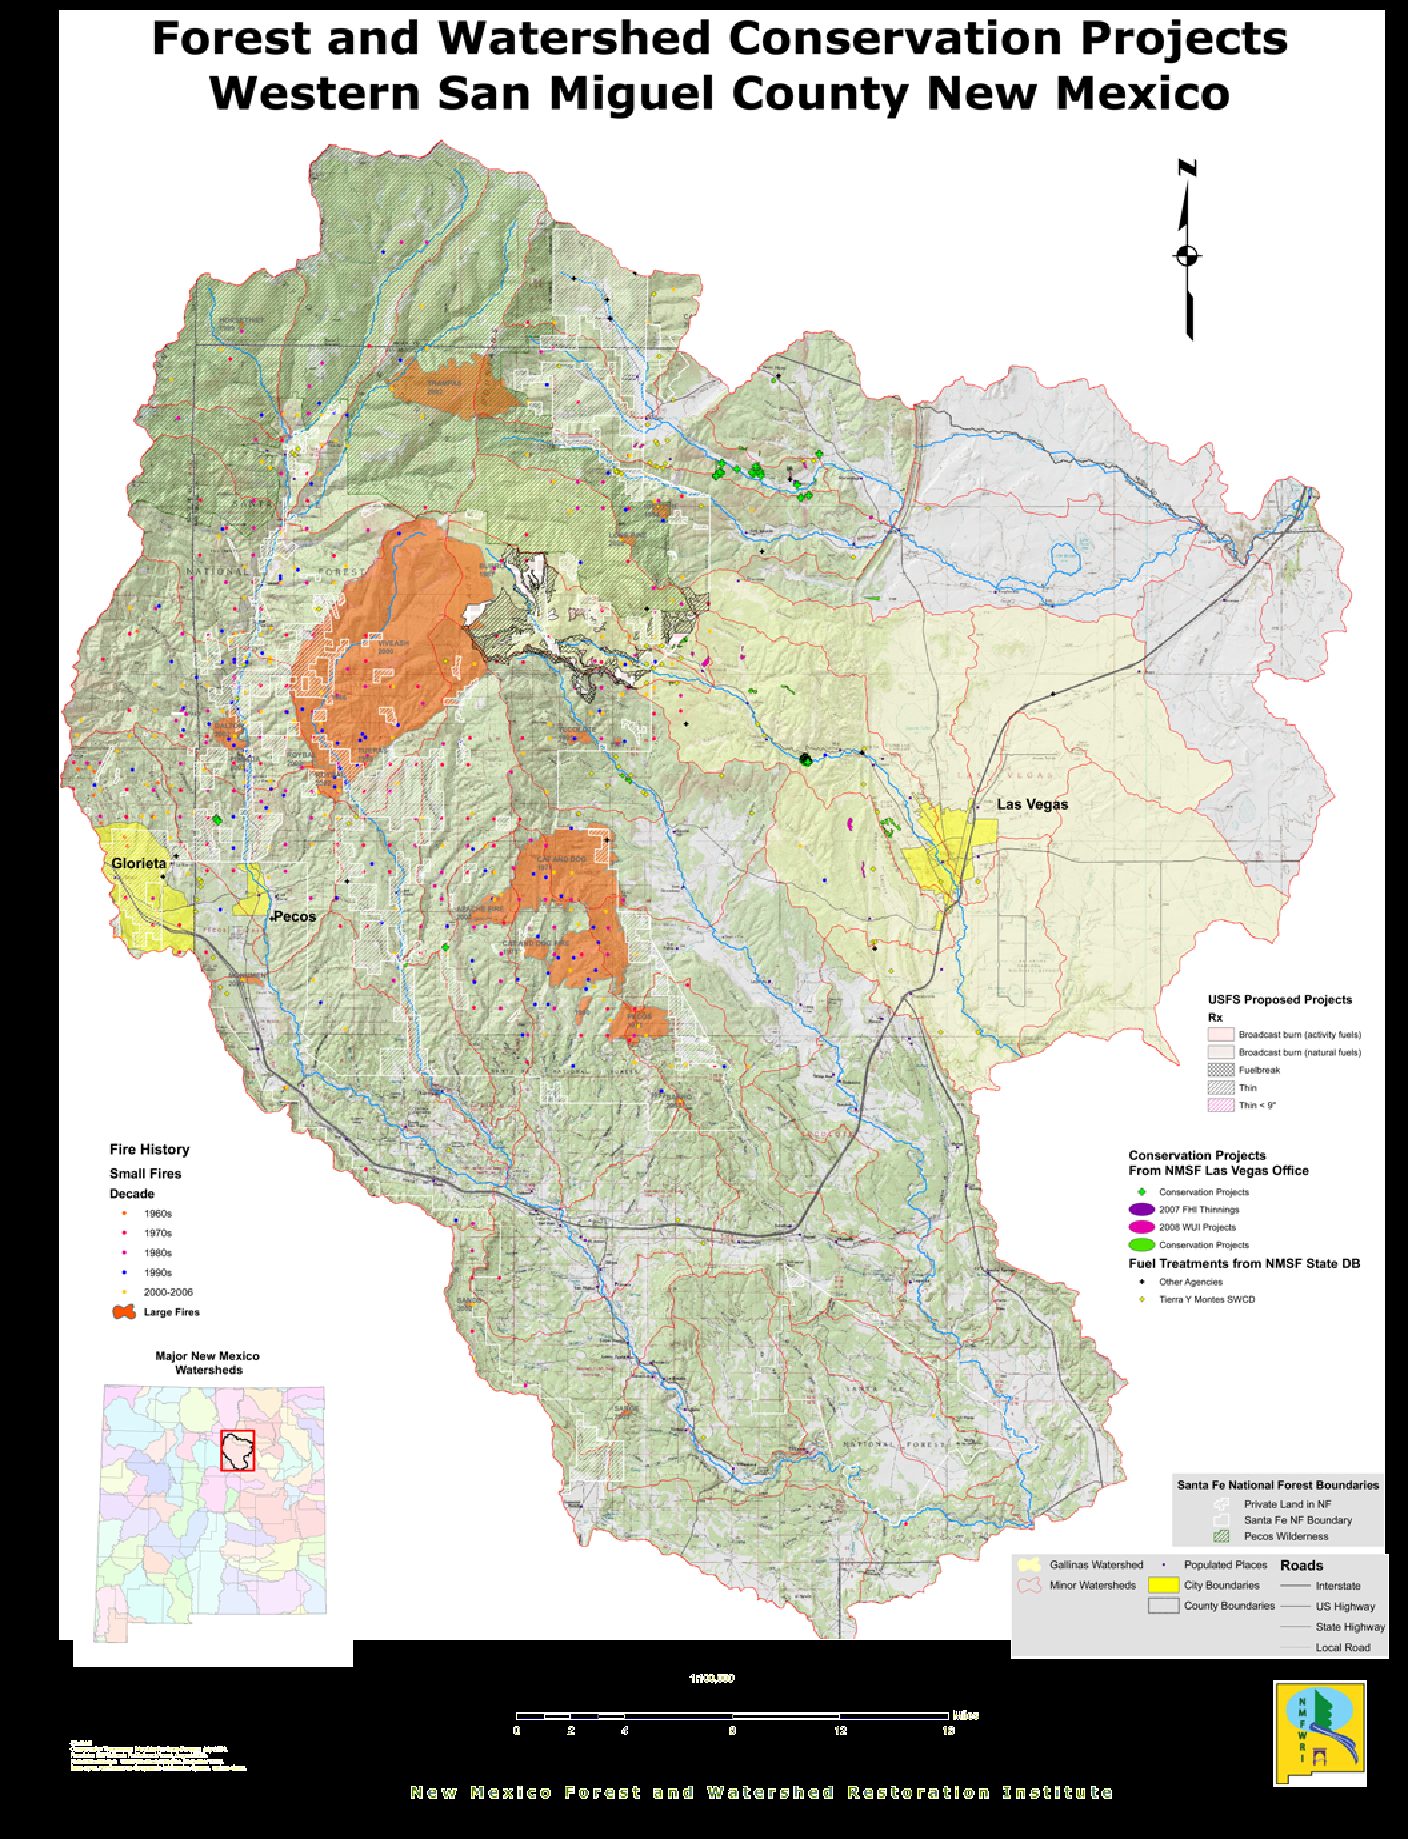 Forest and Watershed Conservation Projects in Western San Miguel County New Mexico